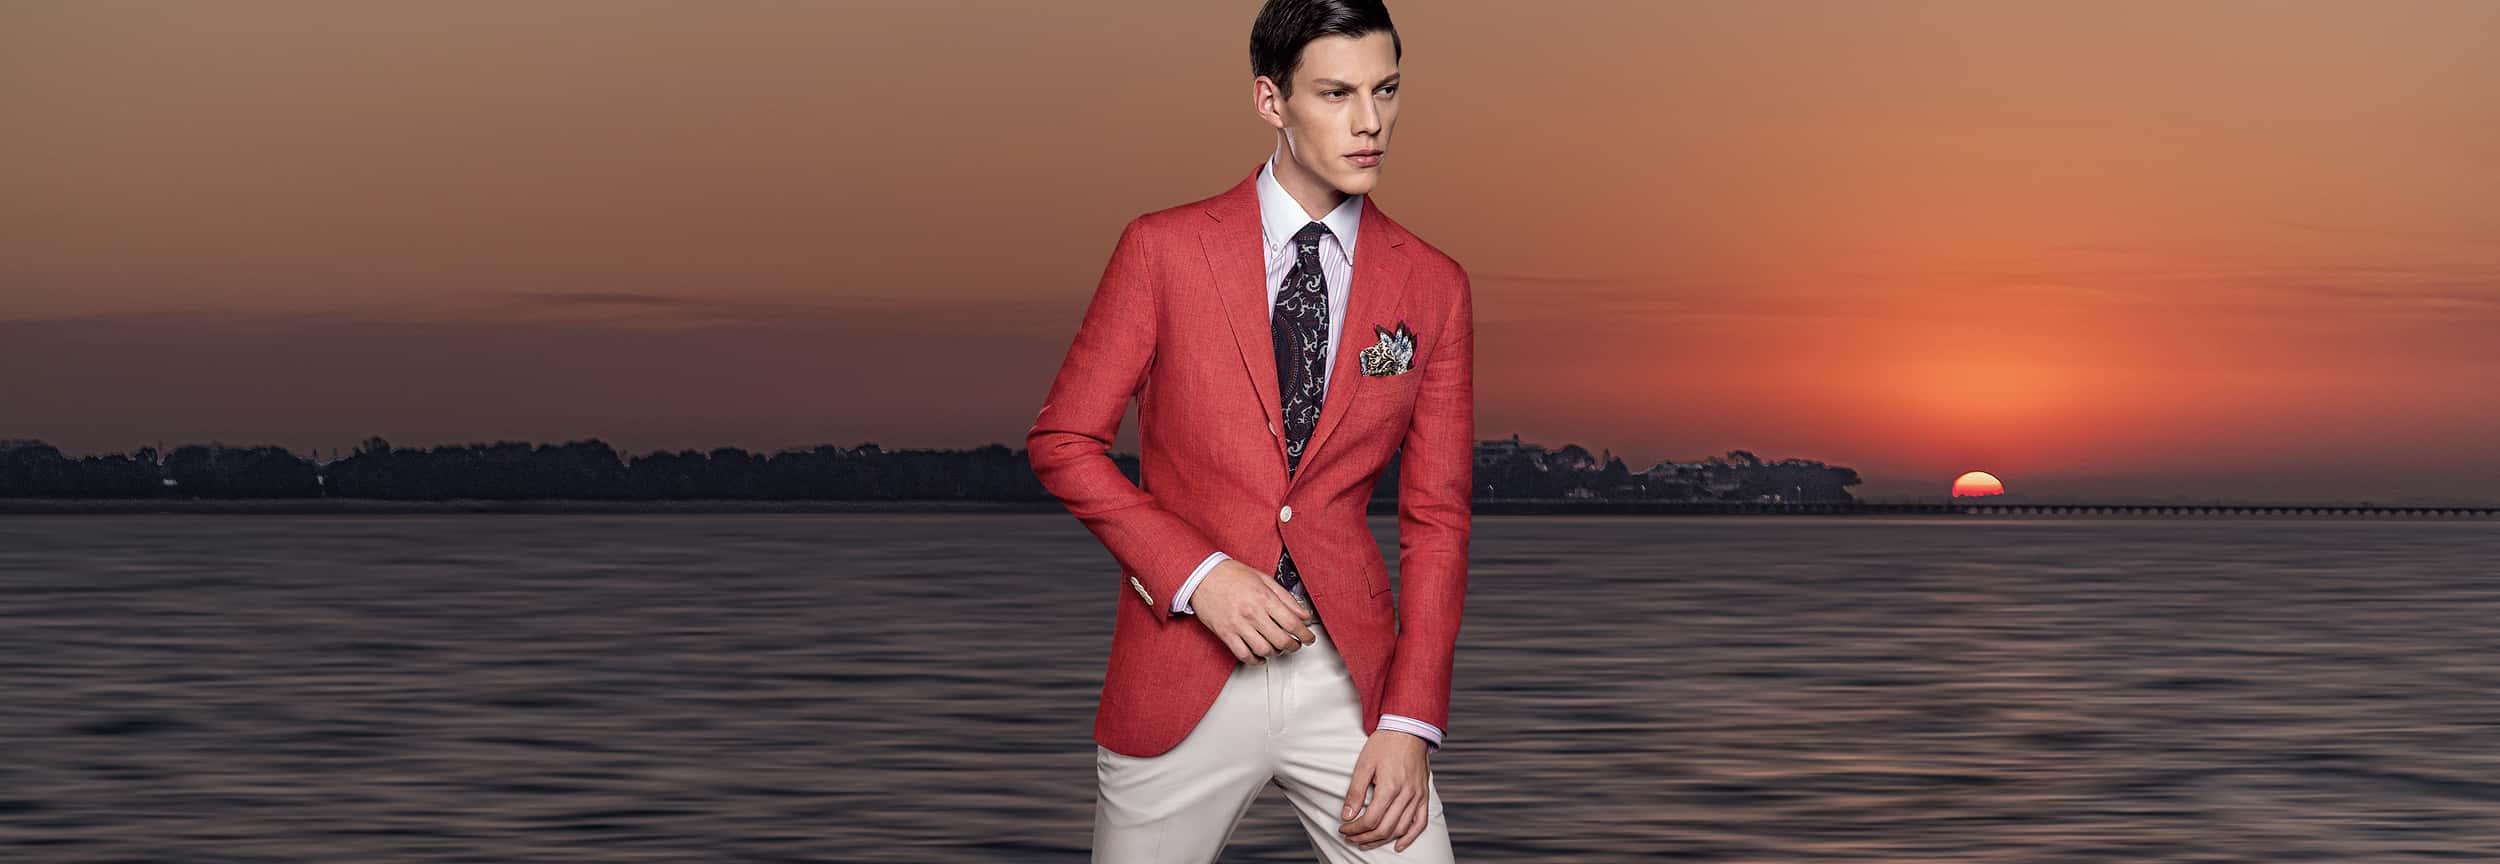 beautiful red sport jacket tailored